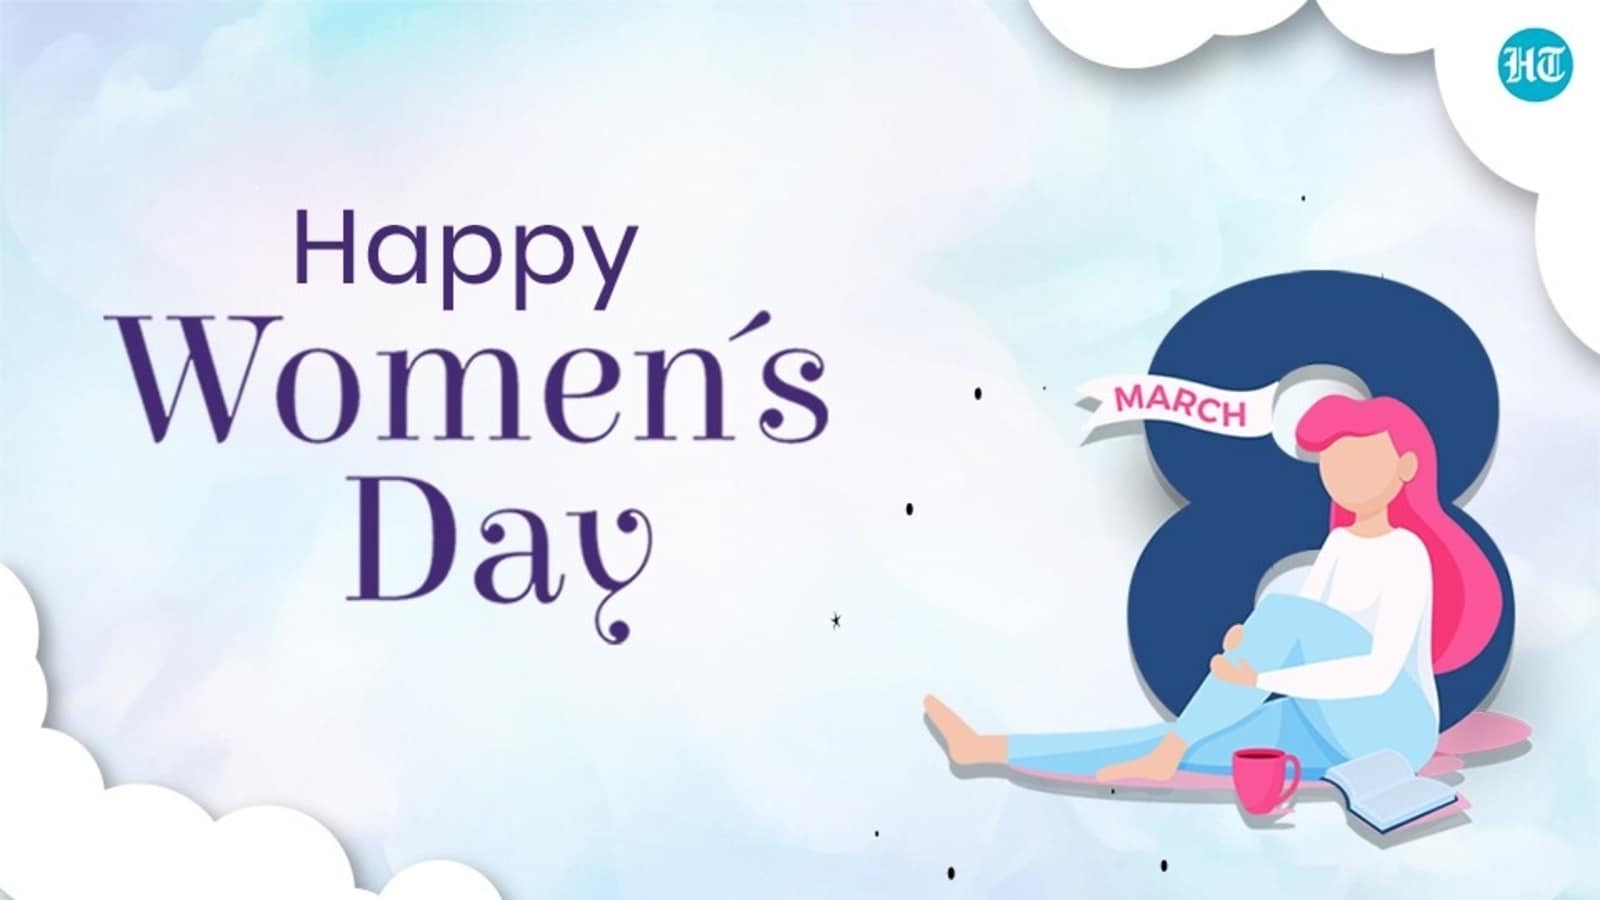 Happy Women's Day 2022: Best wishes, quotes, image, messages and greetings to celebrate women in our lives